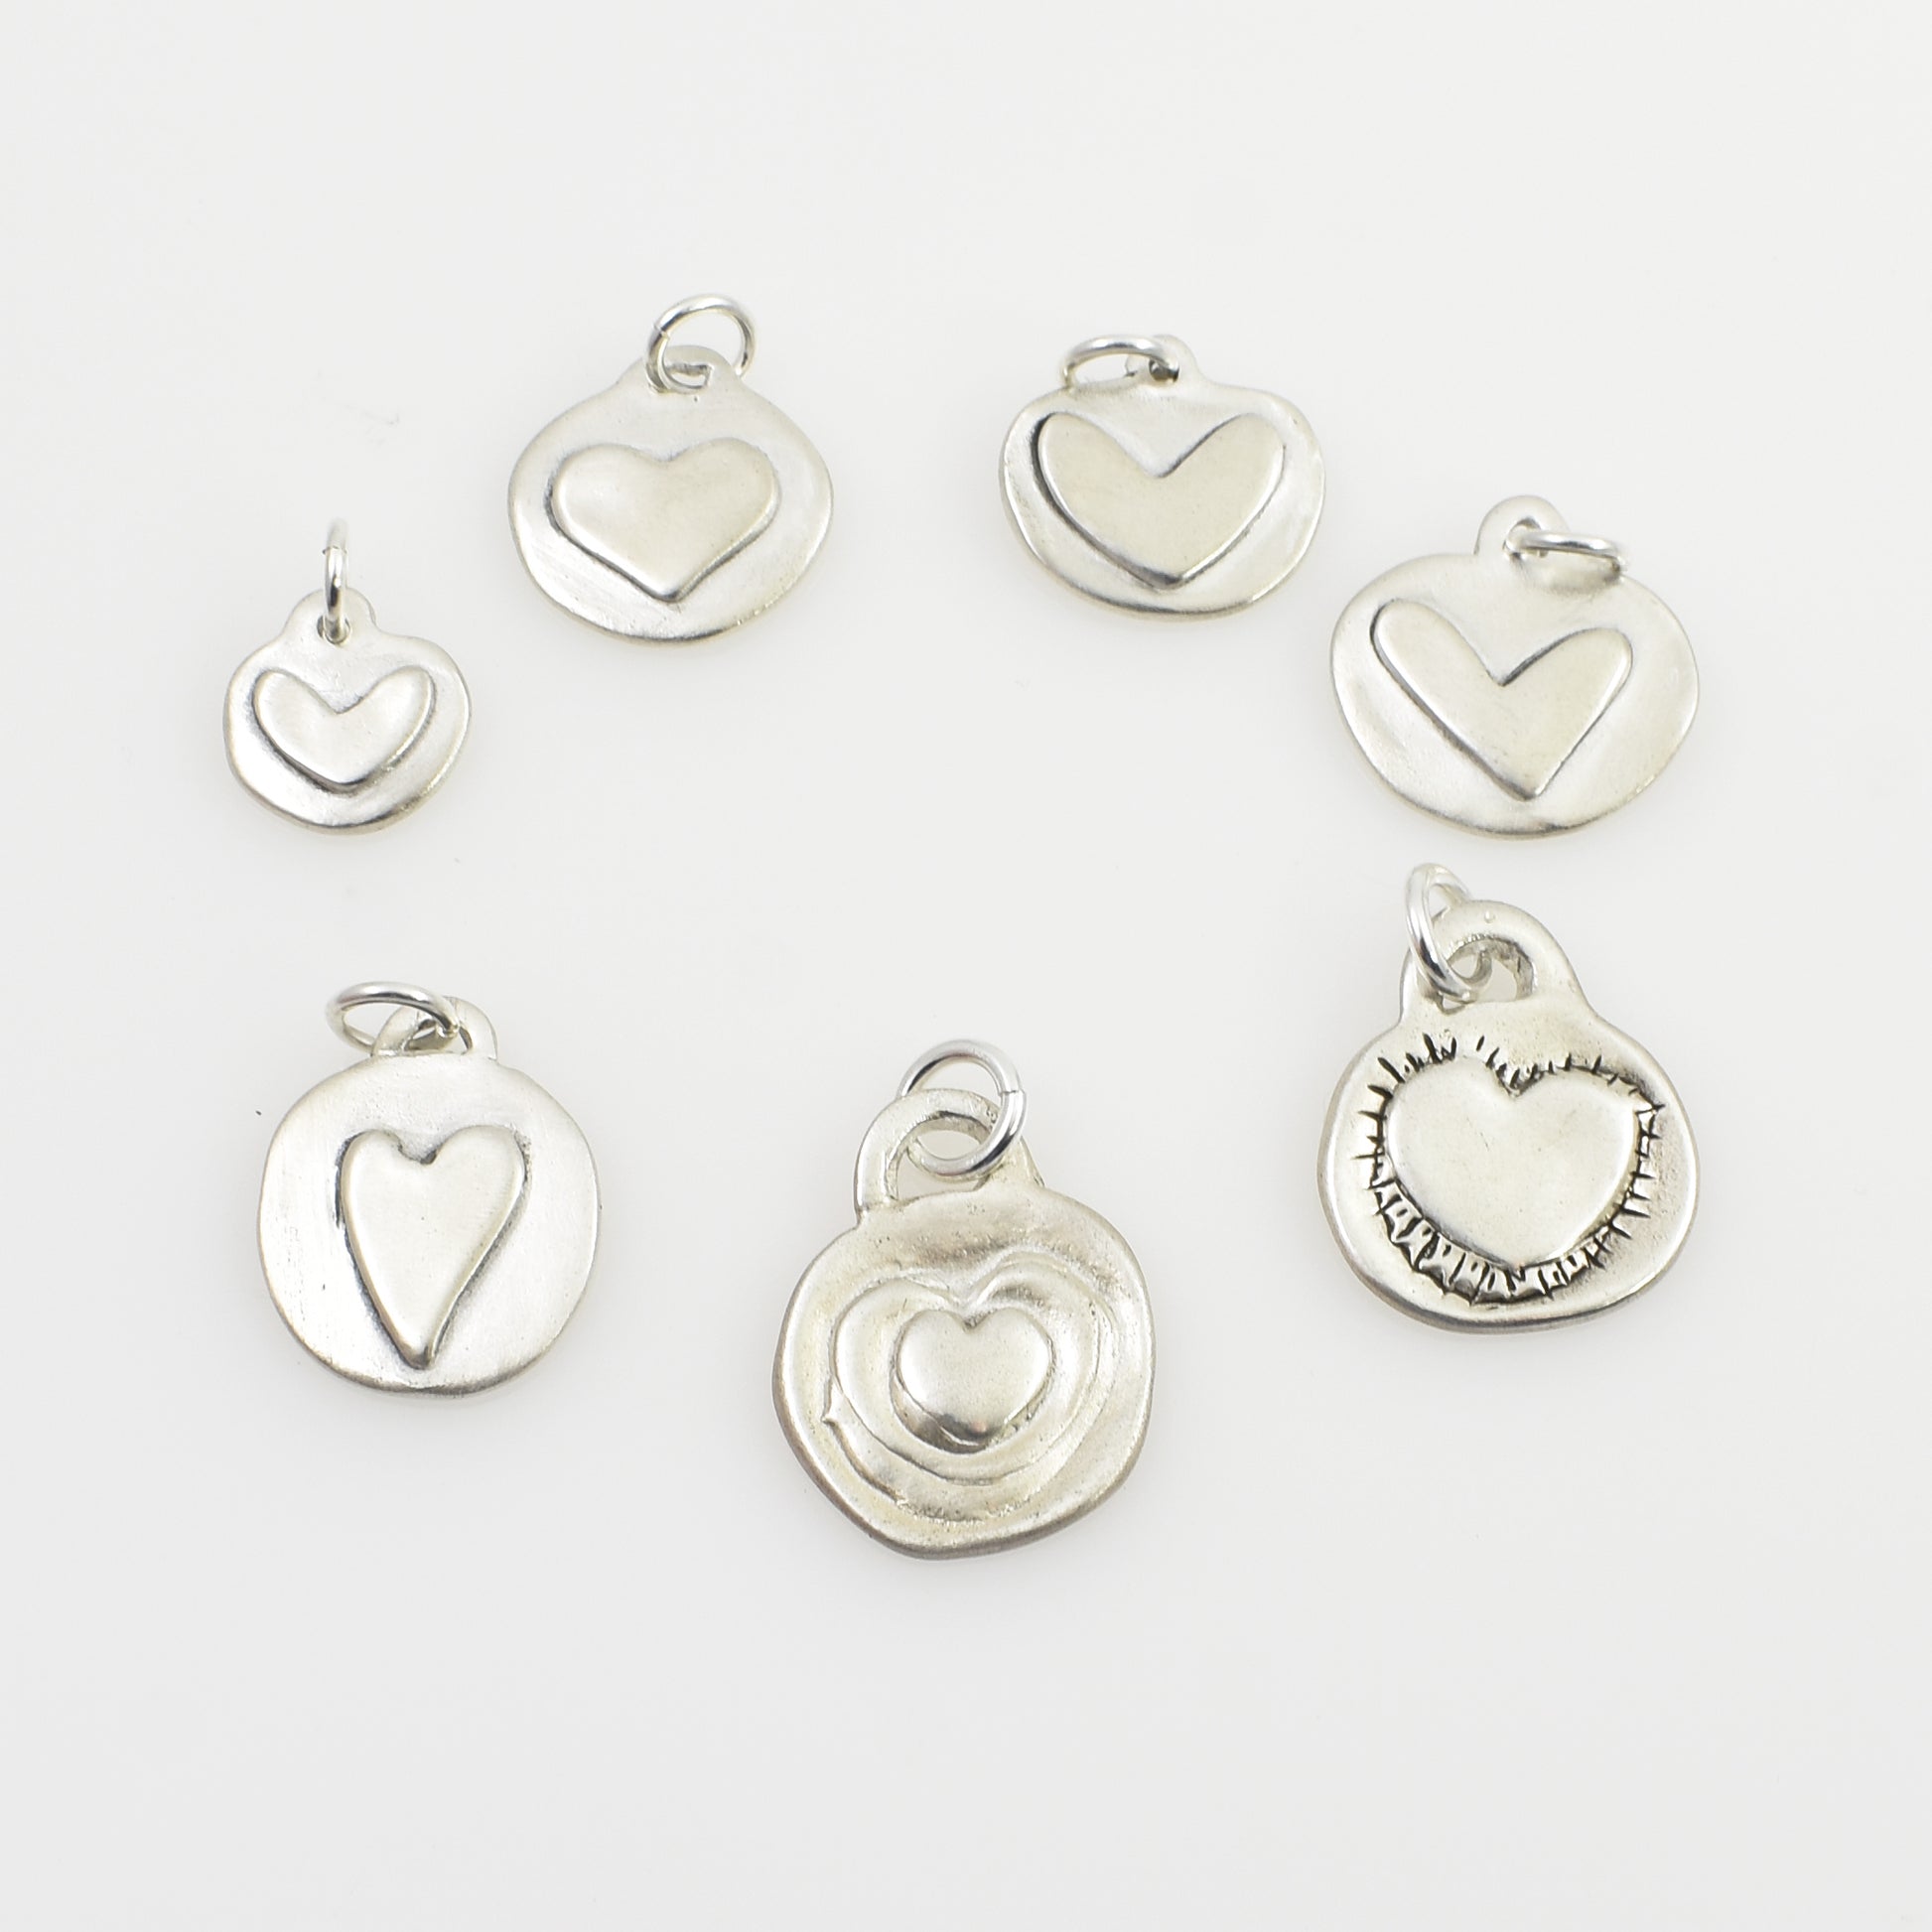 Timeless Hearts - Hearts on Circles - All Charms